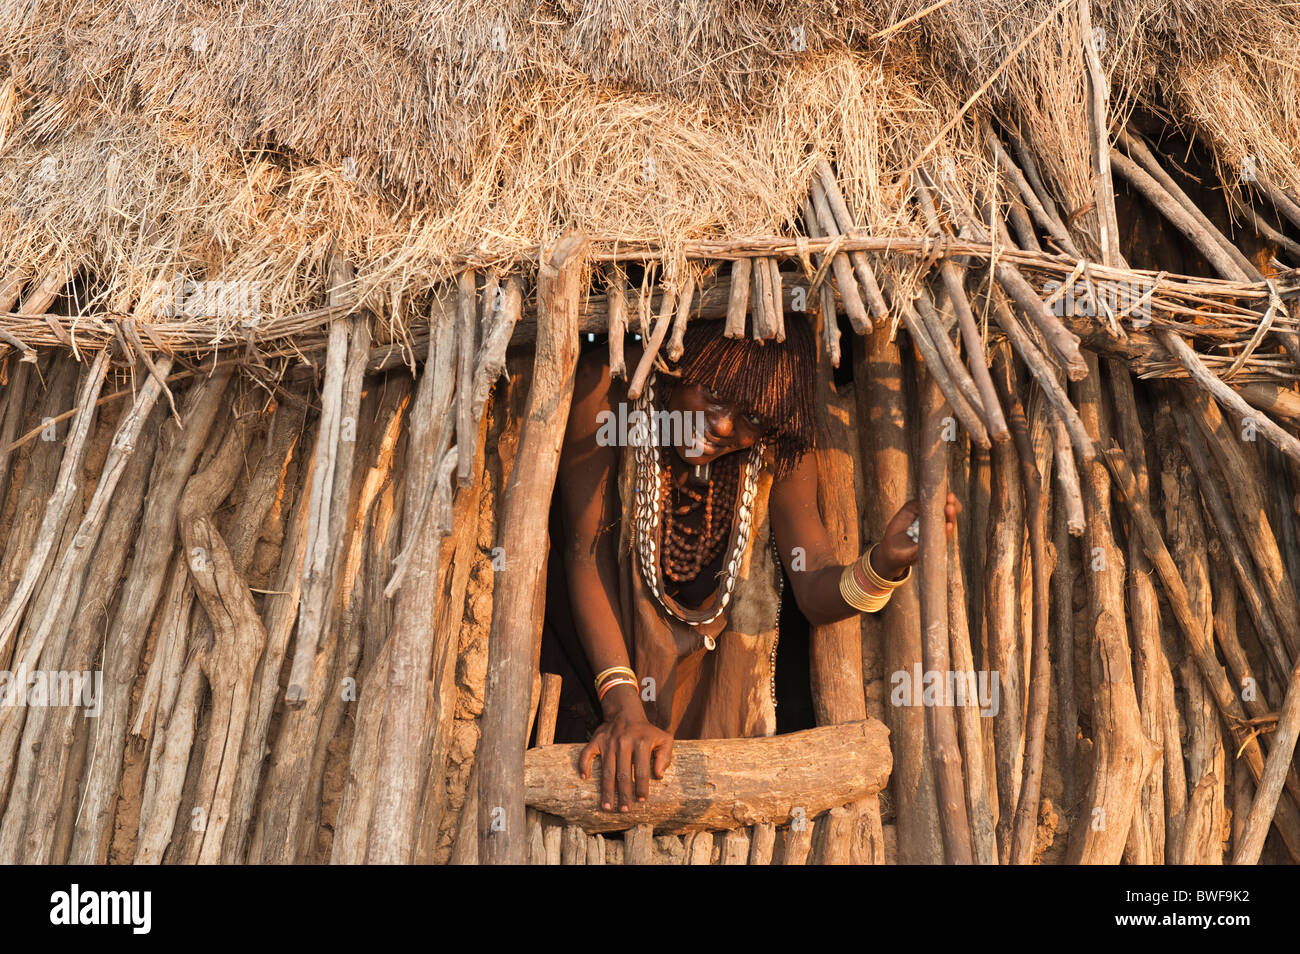 Pregnant Hamar woman with necklaces made of Cowry shells coming out of her wooden hut, Omo river valley Ethiopia Stock Photo